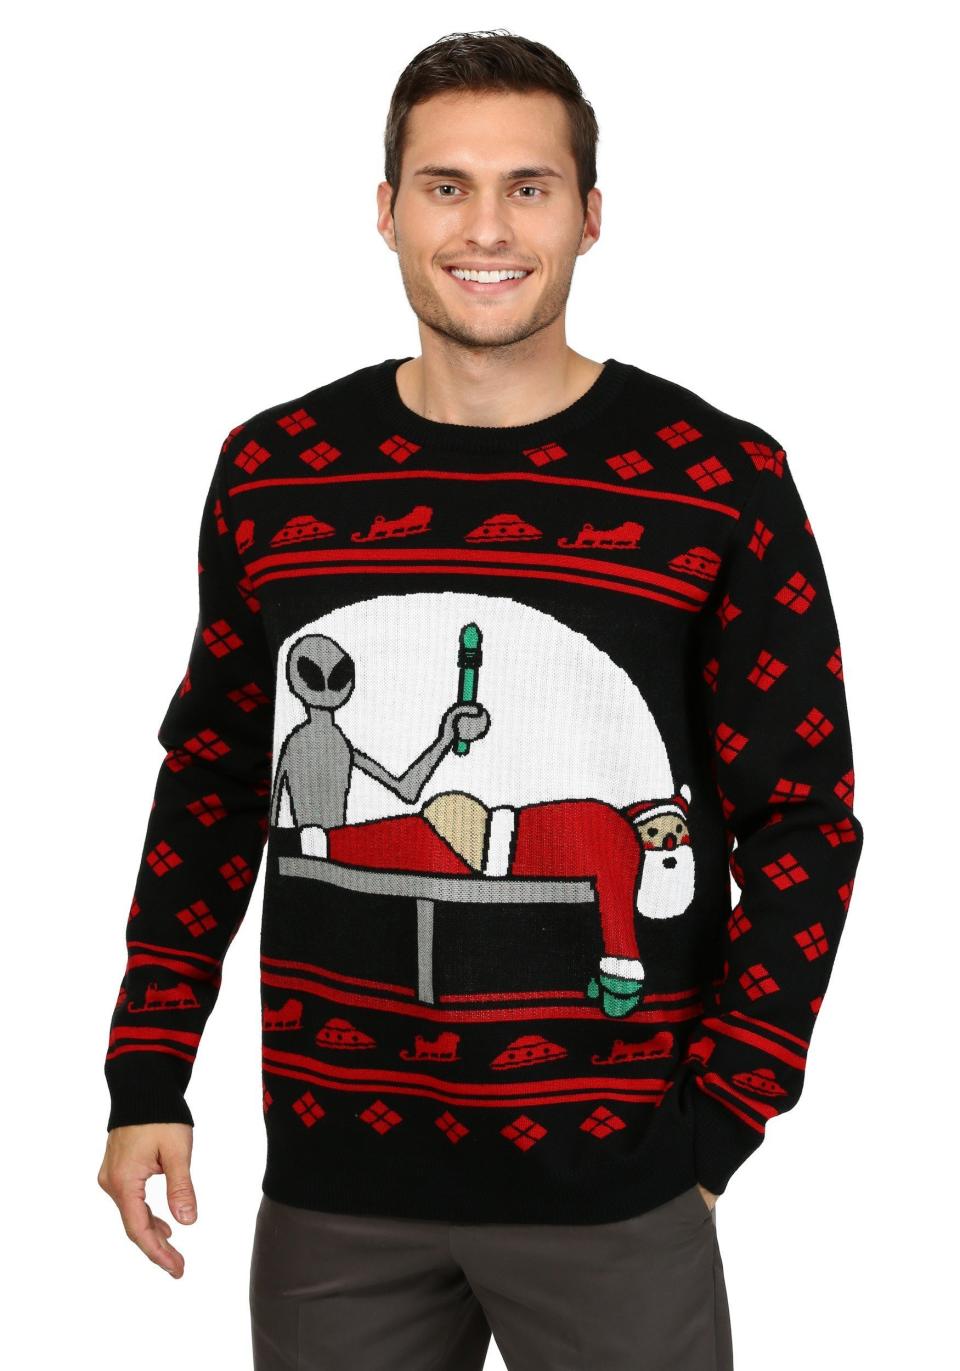 This <a href="https://www.fun.com/men-s-santa-probe-christmas-sweater.html" target="_blank">sweater</a> is a reminder that all men over 50 should get a colonoscopy -- even Santa.<a href="https://www.fun.com/men-s-santa-probe-christmas-sweater.html"><br /><br /></a>